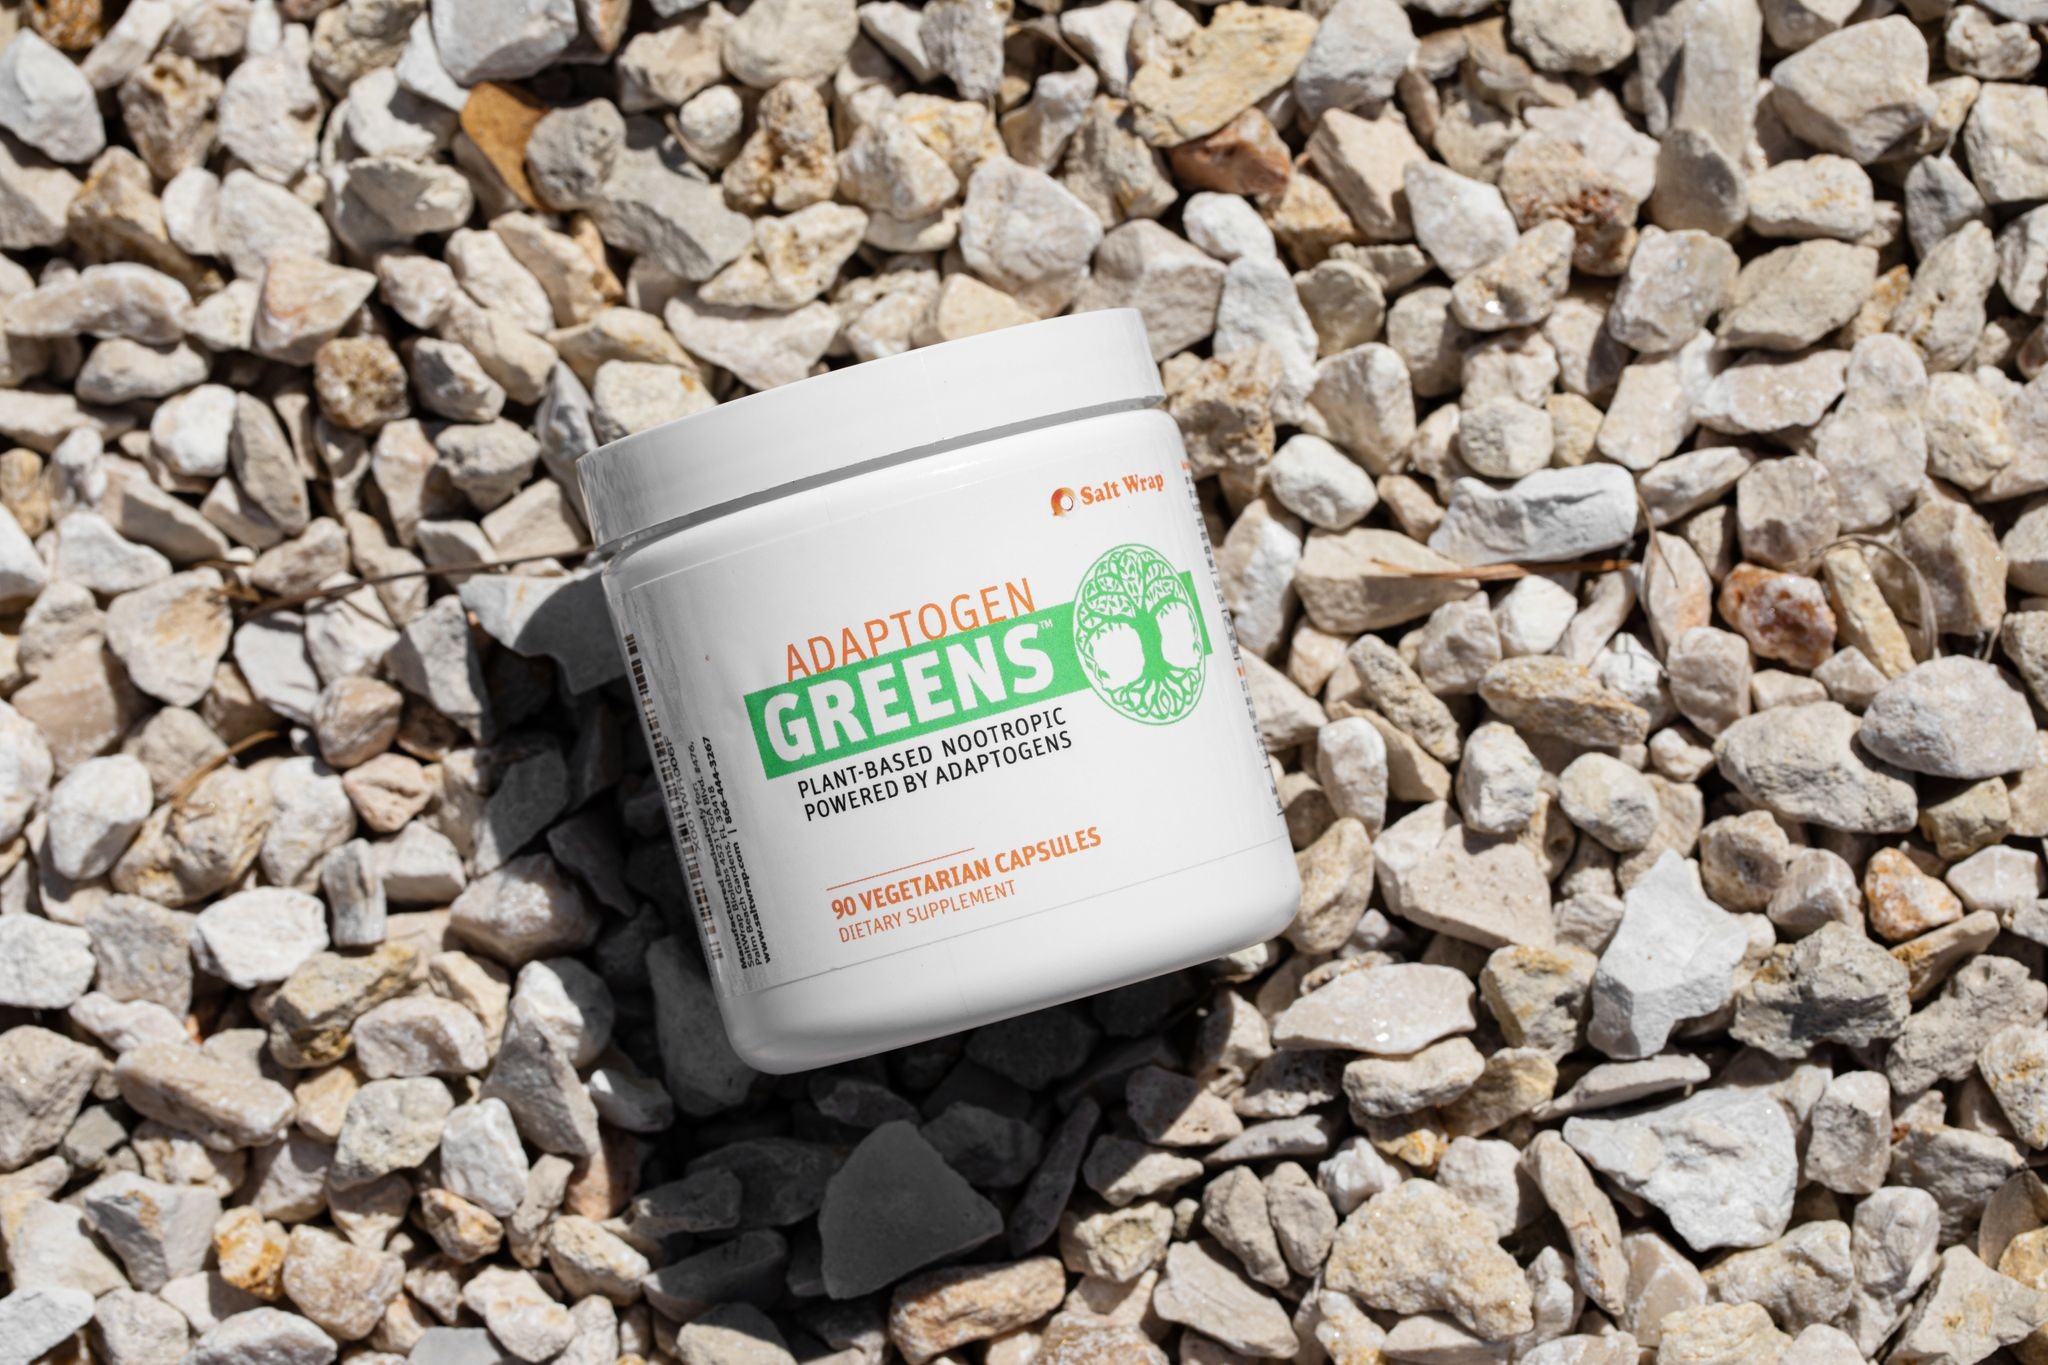 Think of Adaptogen Greens™ as your daily deload – ensuring you're constantly nourished, protected, and ready to perform.